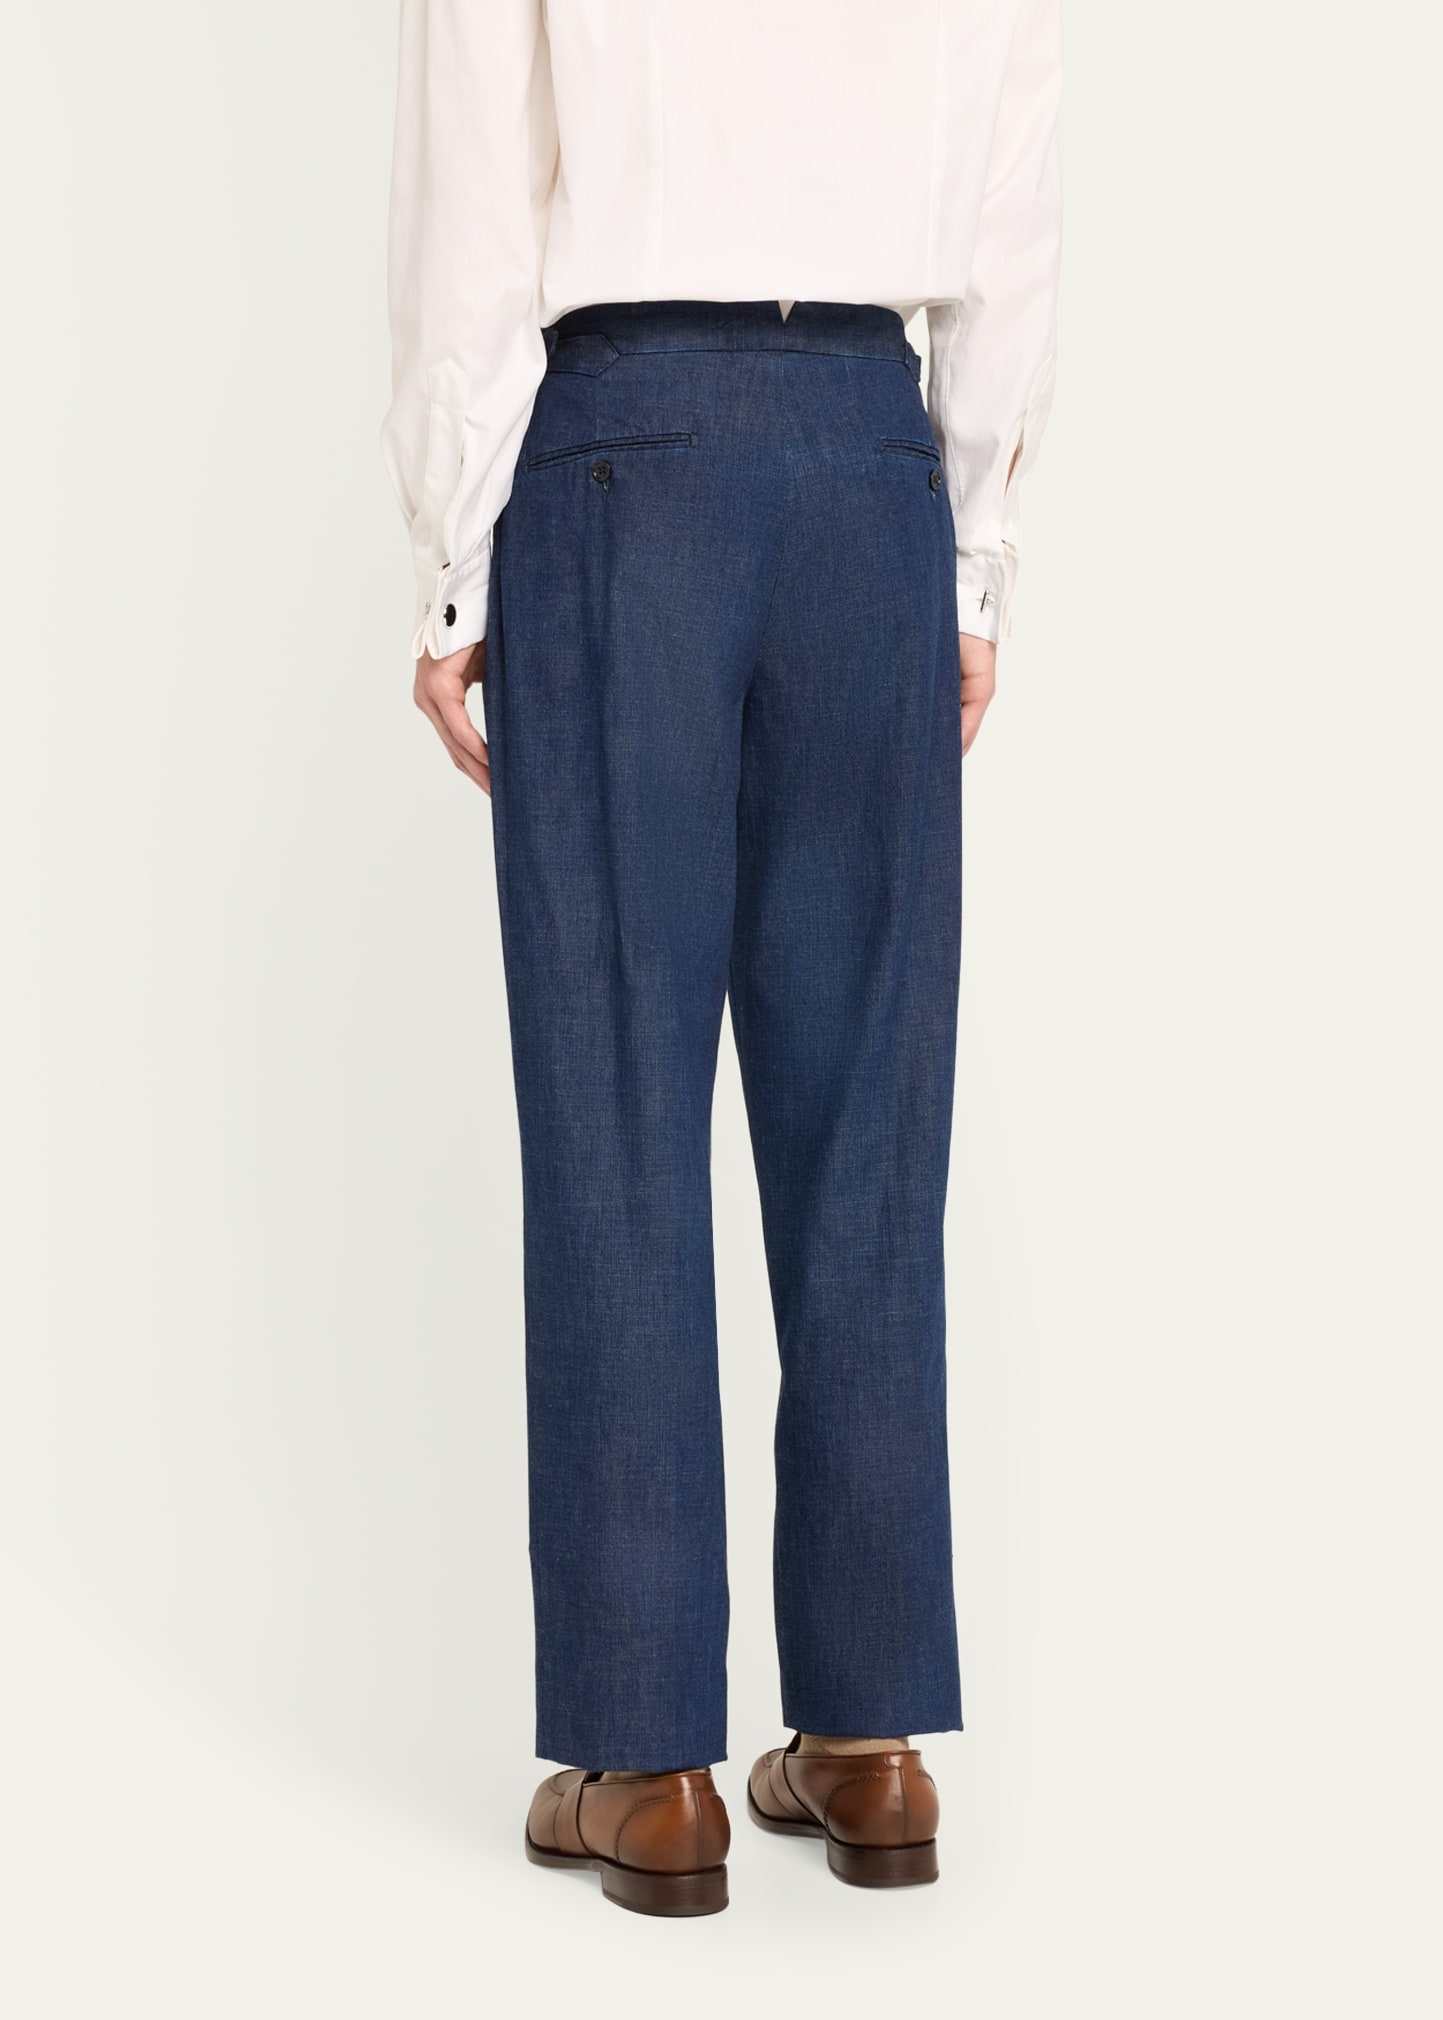 Men's Gregory Hand-Tailored Denim Suit Trousers - 3